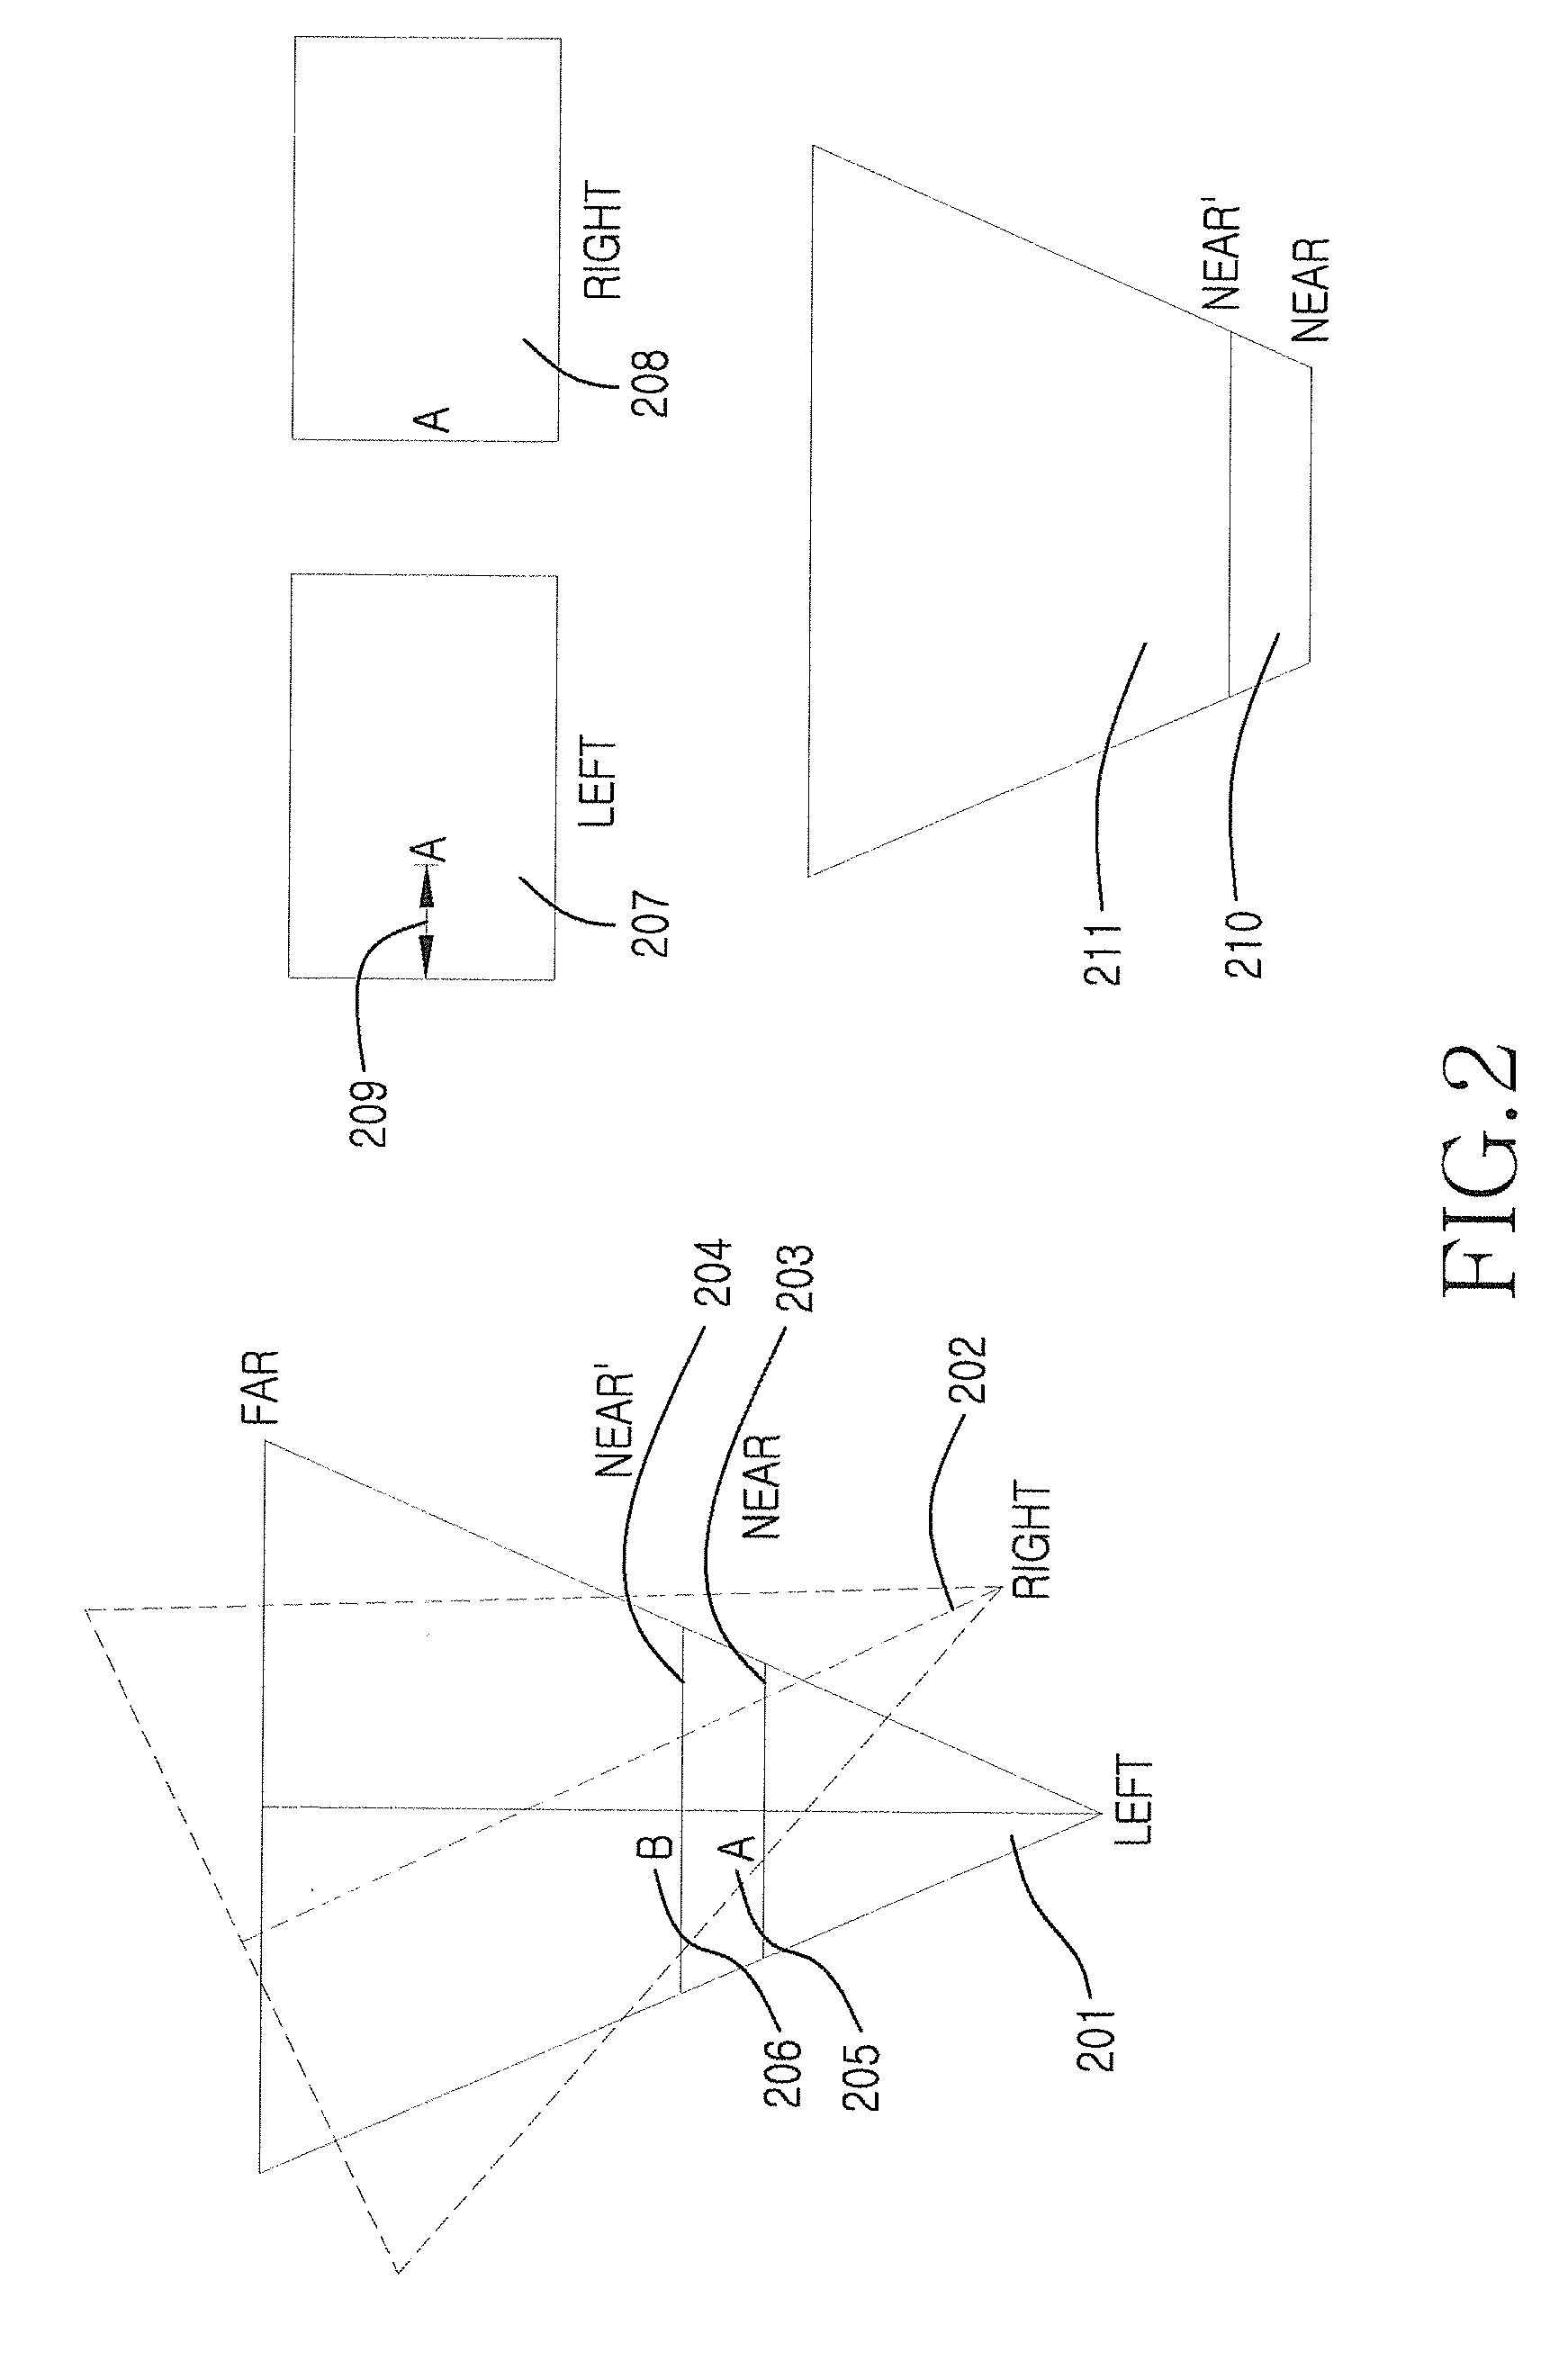 Apparatus and method for rendering object in 3D graphic terminal